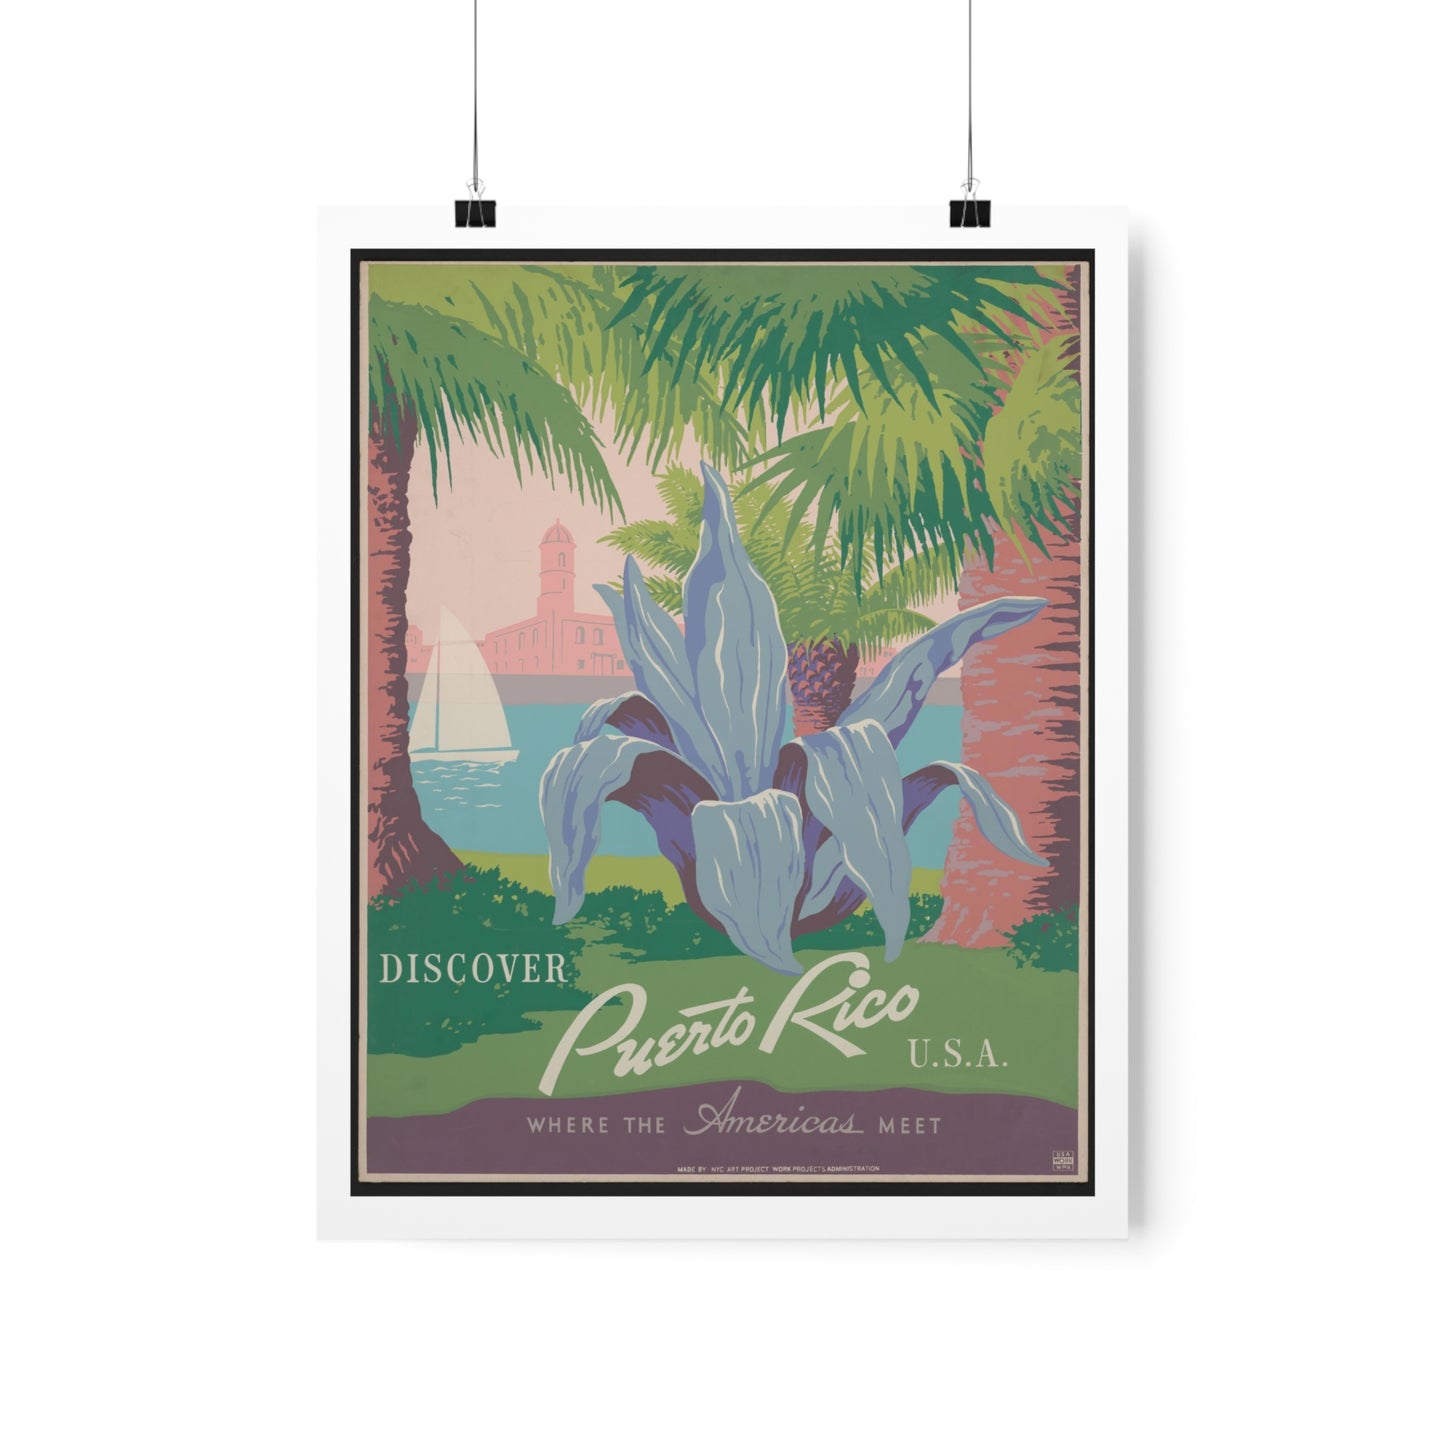 A vintage poster from between 1936 and 1940 promoting tourism to Puerto Rico, created for the Works Project Administration. Poster is primarily pastel blue, pink, greens, and dark purples and is a scene of palm trees in front of water with a large tropical plant and a sailboat in background.